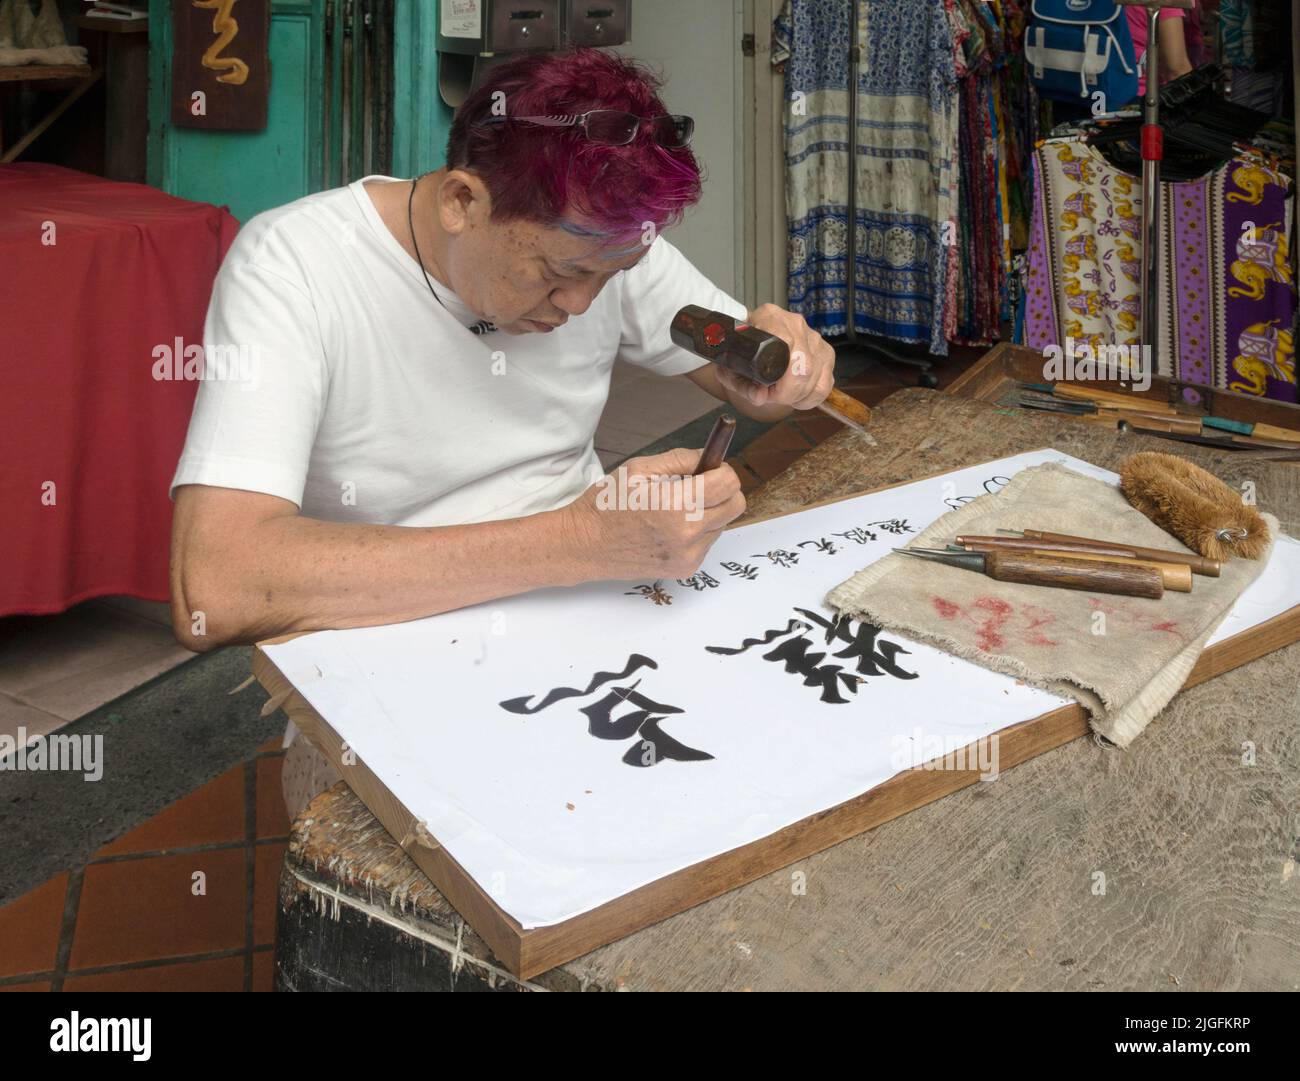 Chinese artisan at work at the Yong Gallery, Republic of Singapore Stock Photo